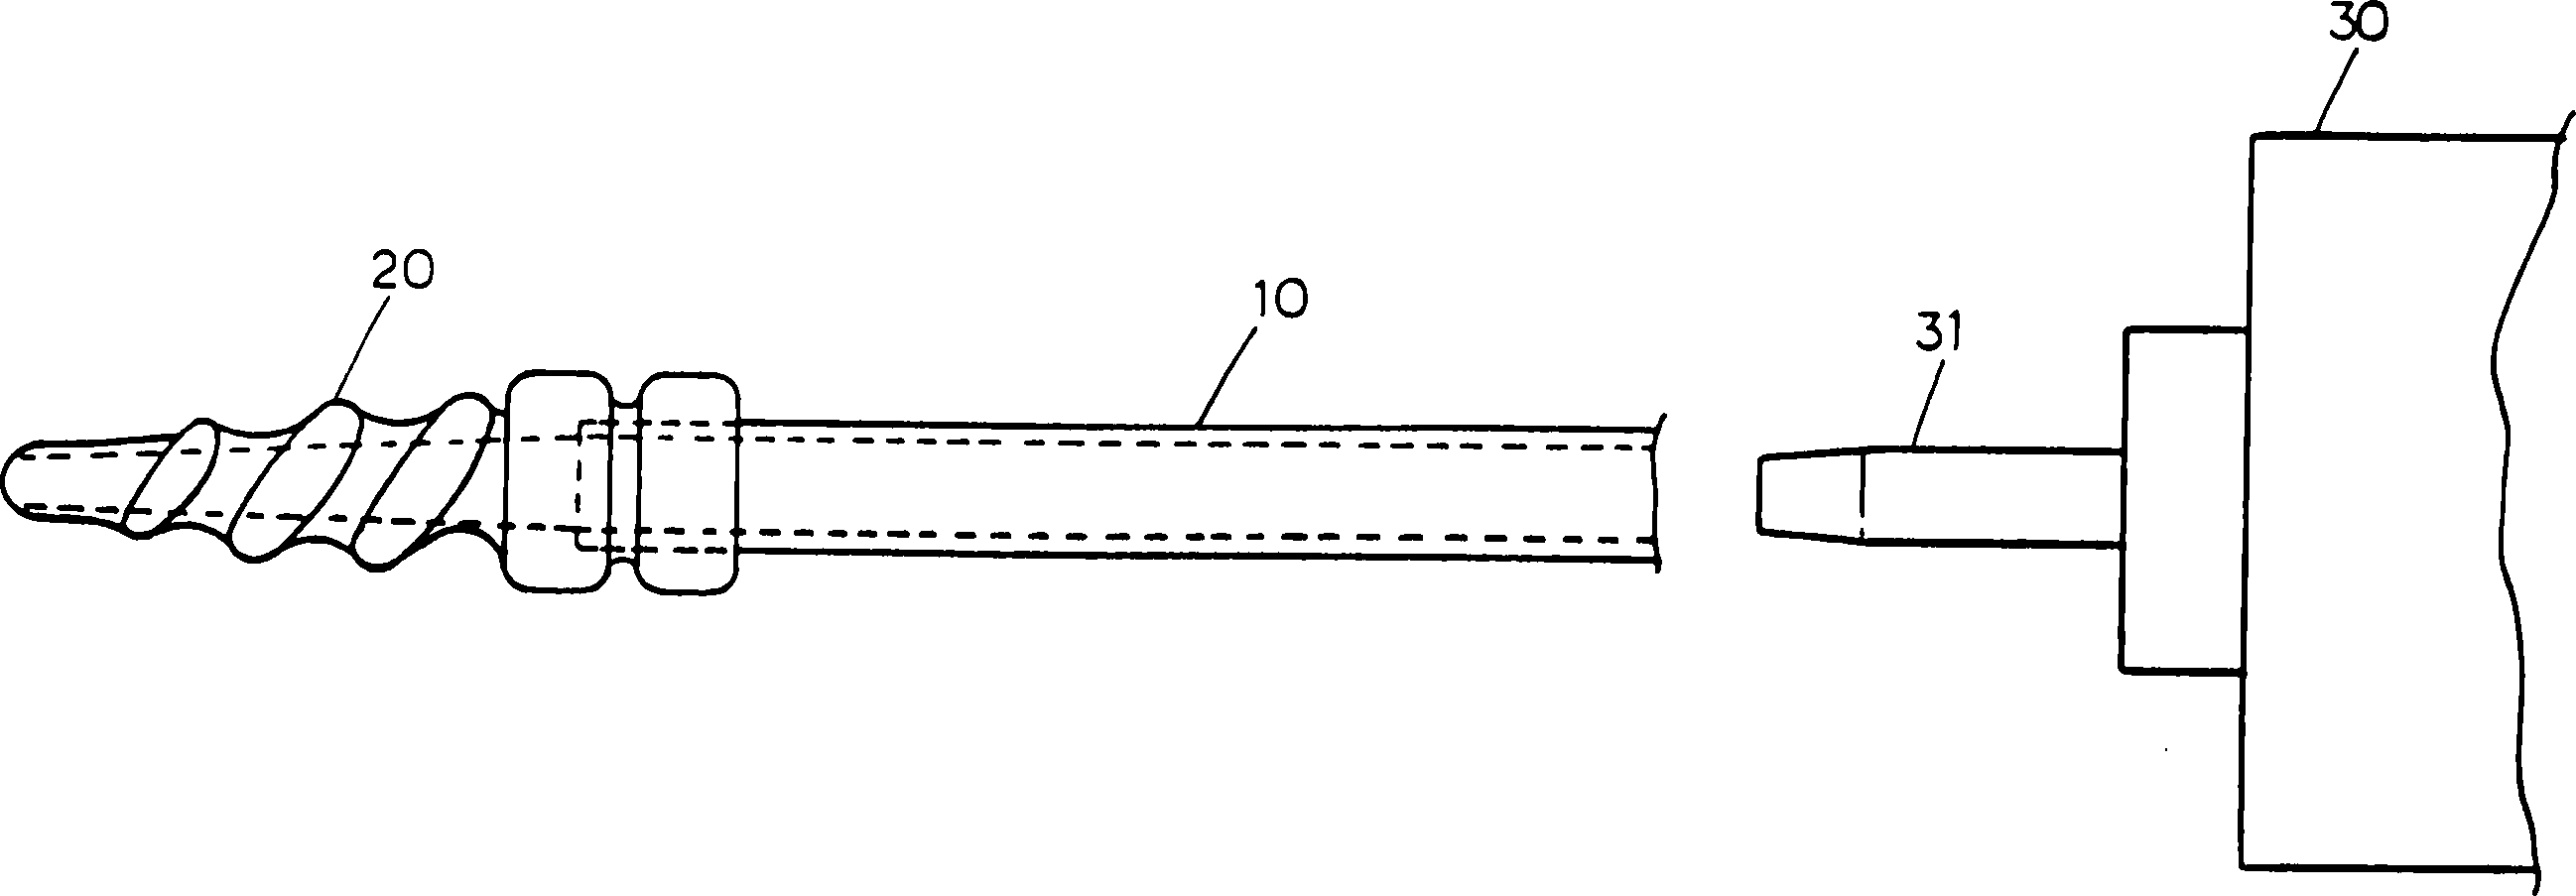 Artificial trace insemination device for animal